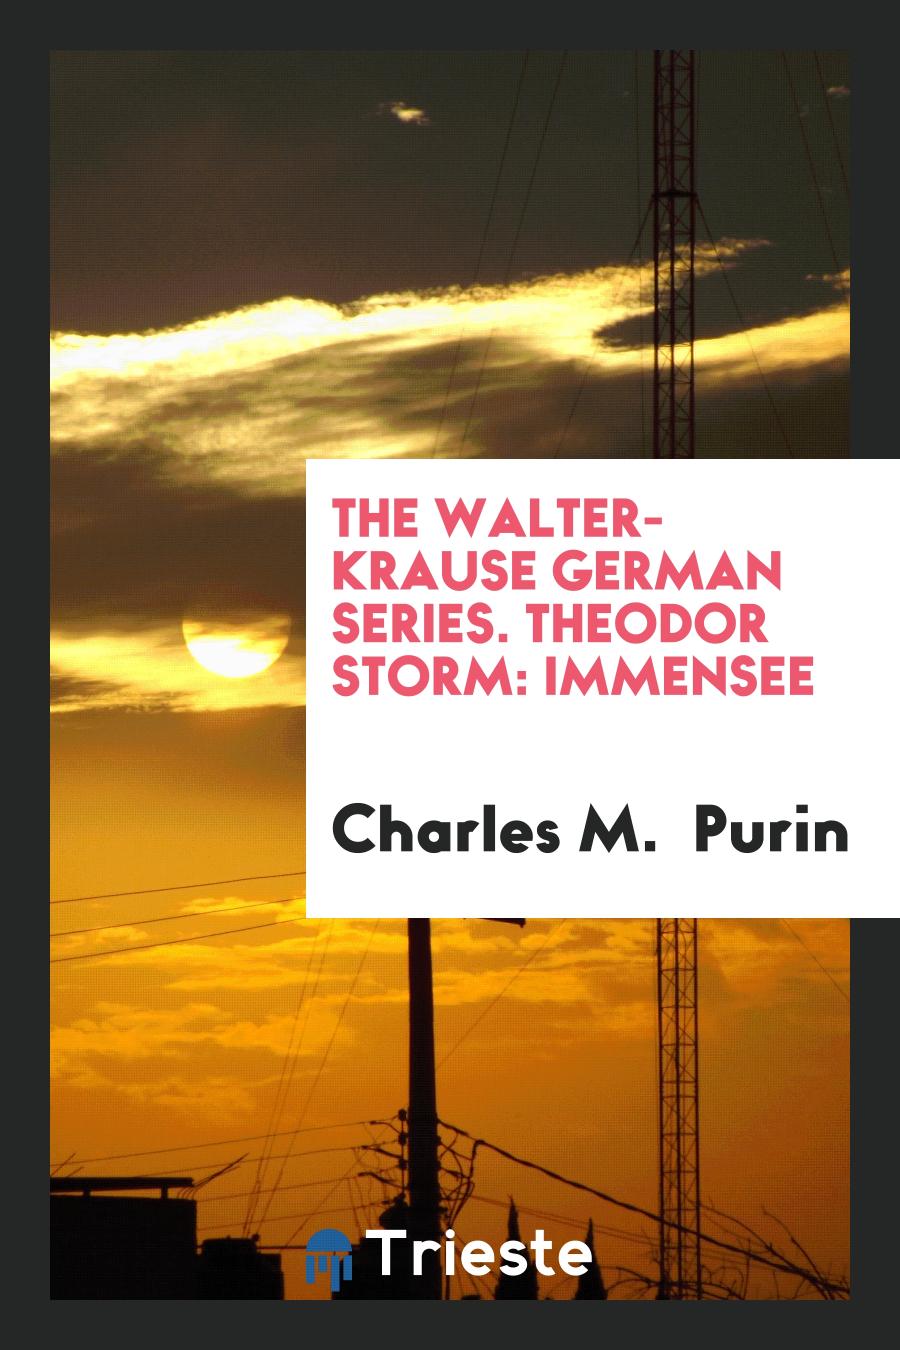 The Walter-Krause German Series. Theodor Storm: Immensee